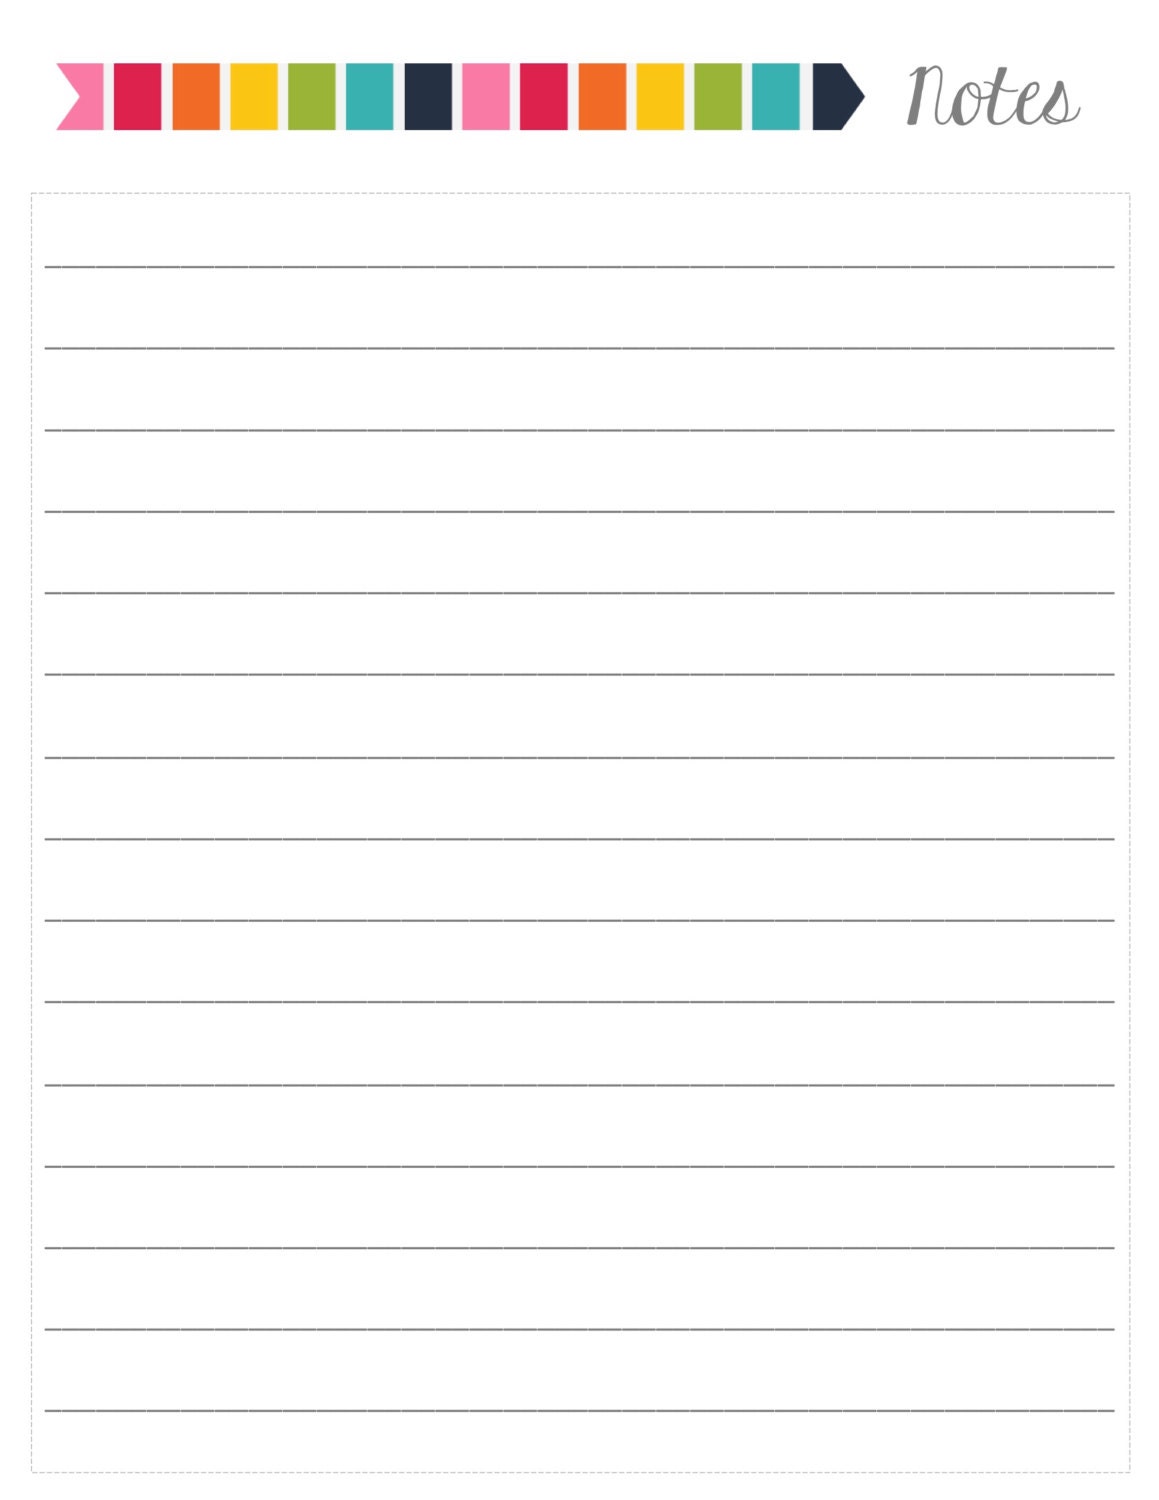 Notes Printable. Note Page line. Color Note. Note page